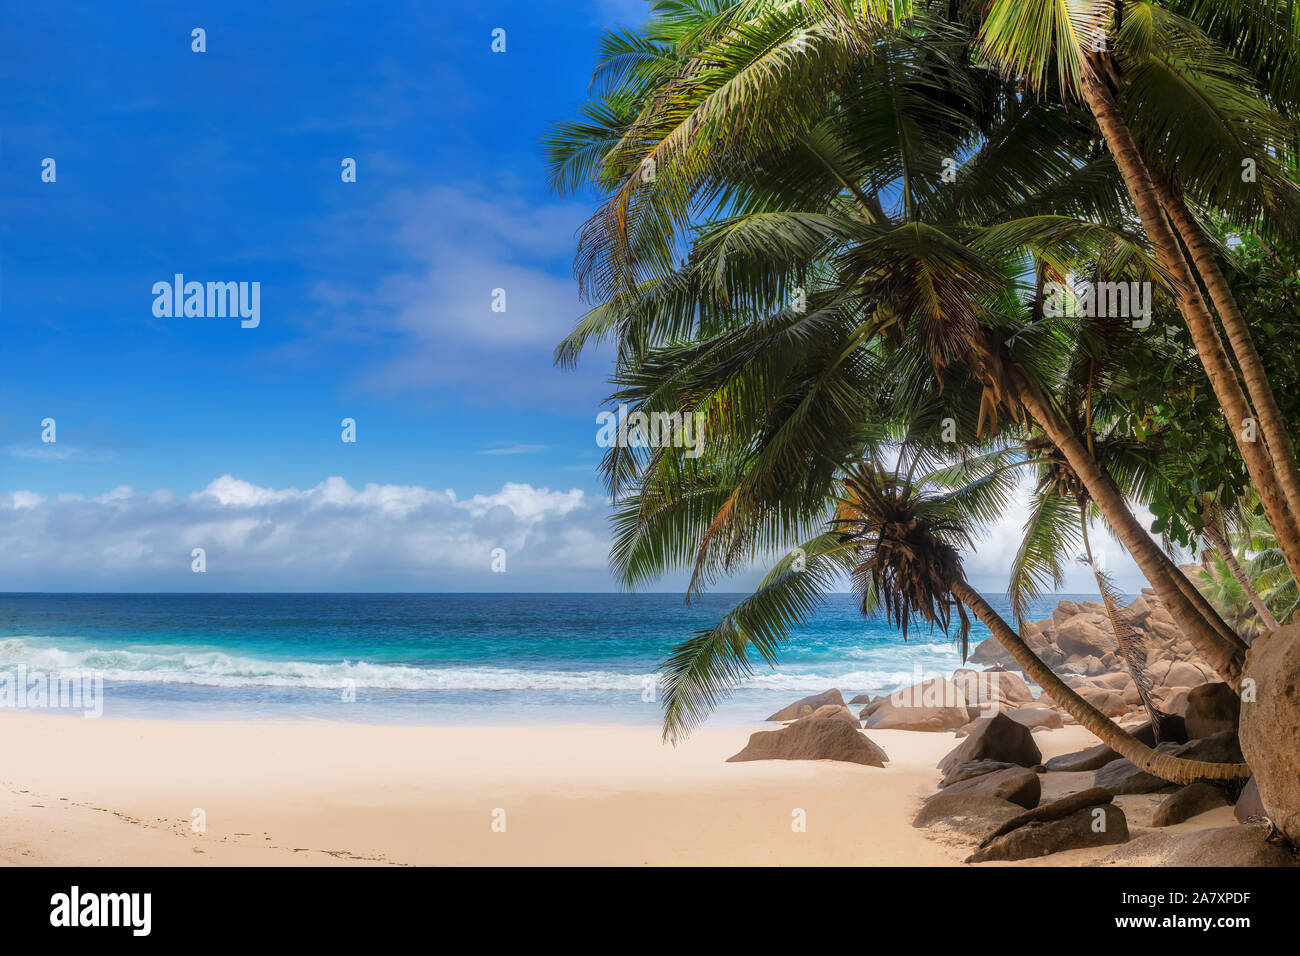 Exotic beach with coconut palm trees Stock Photo